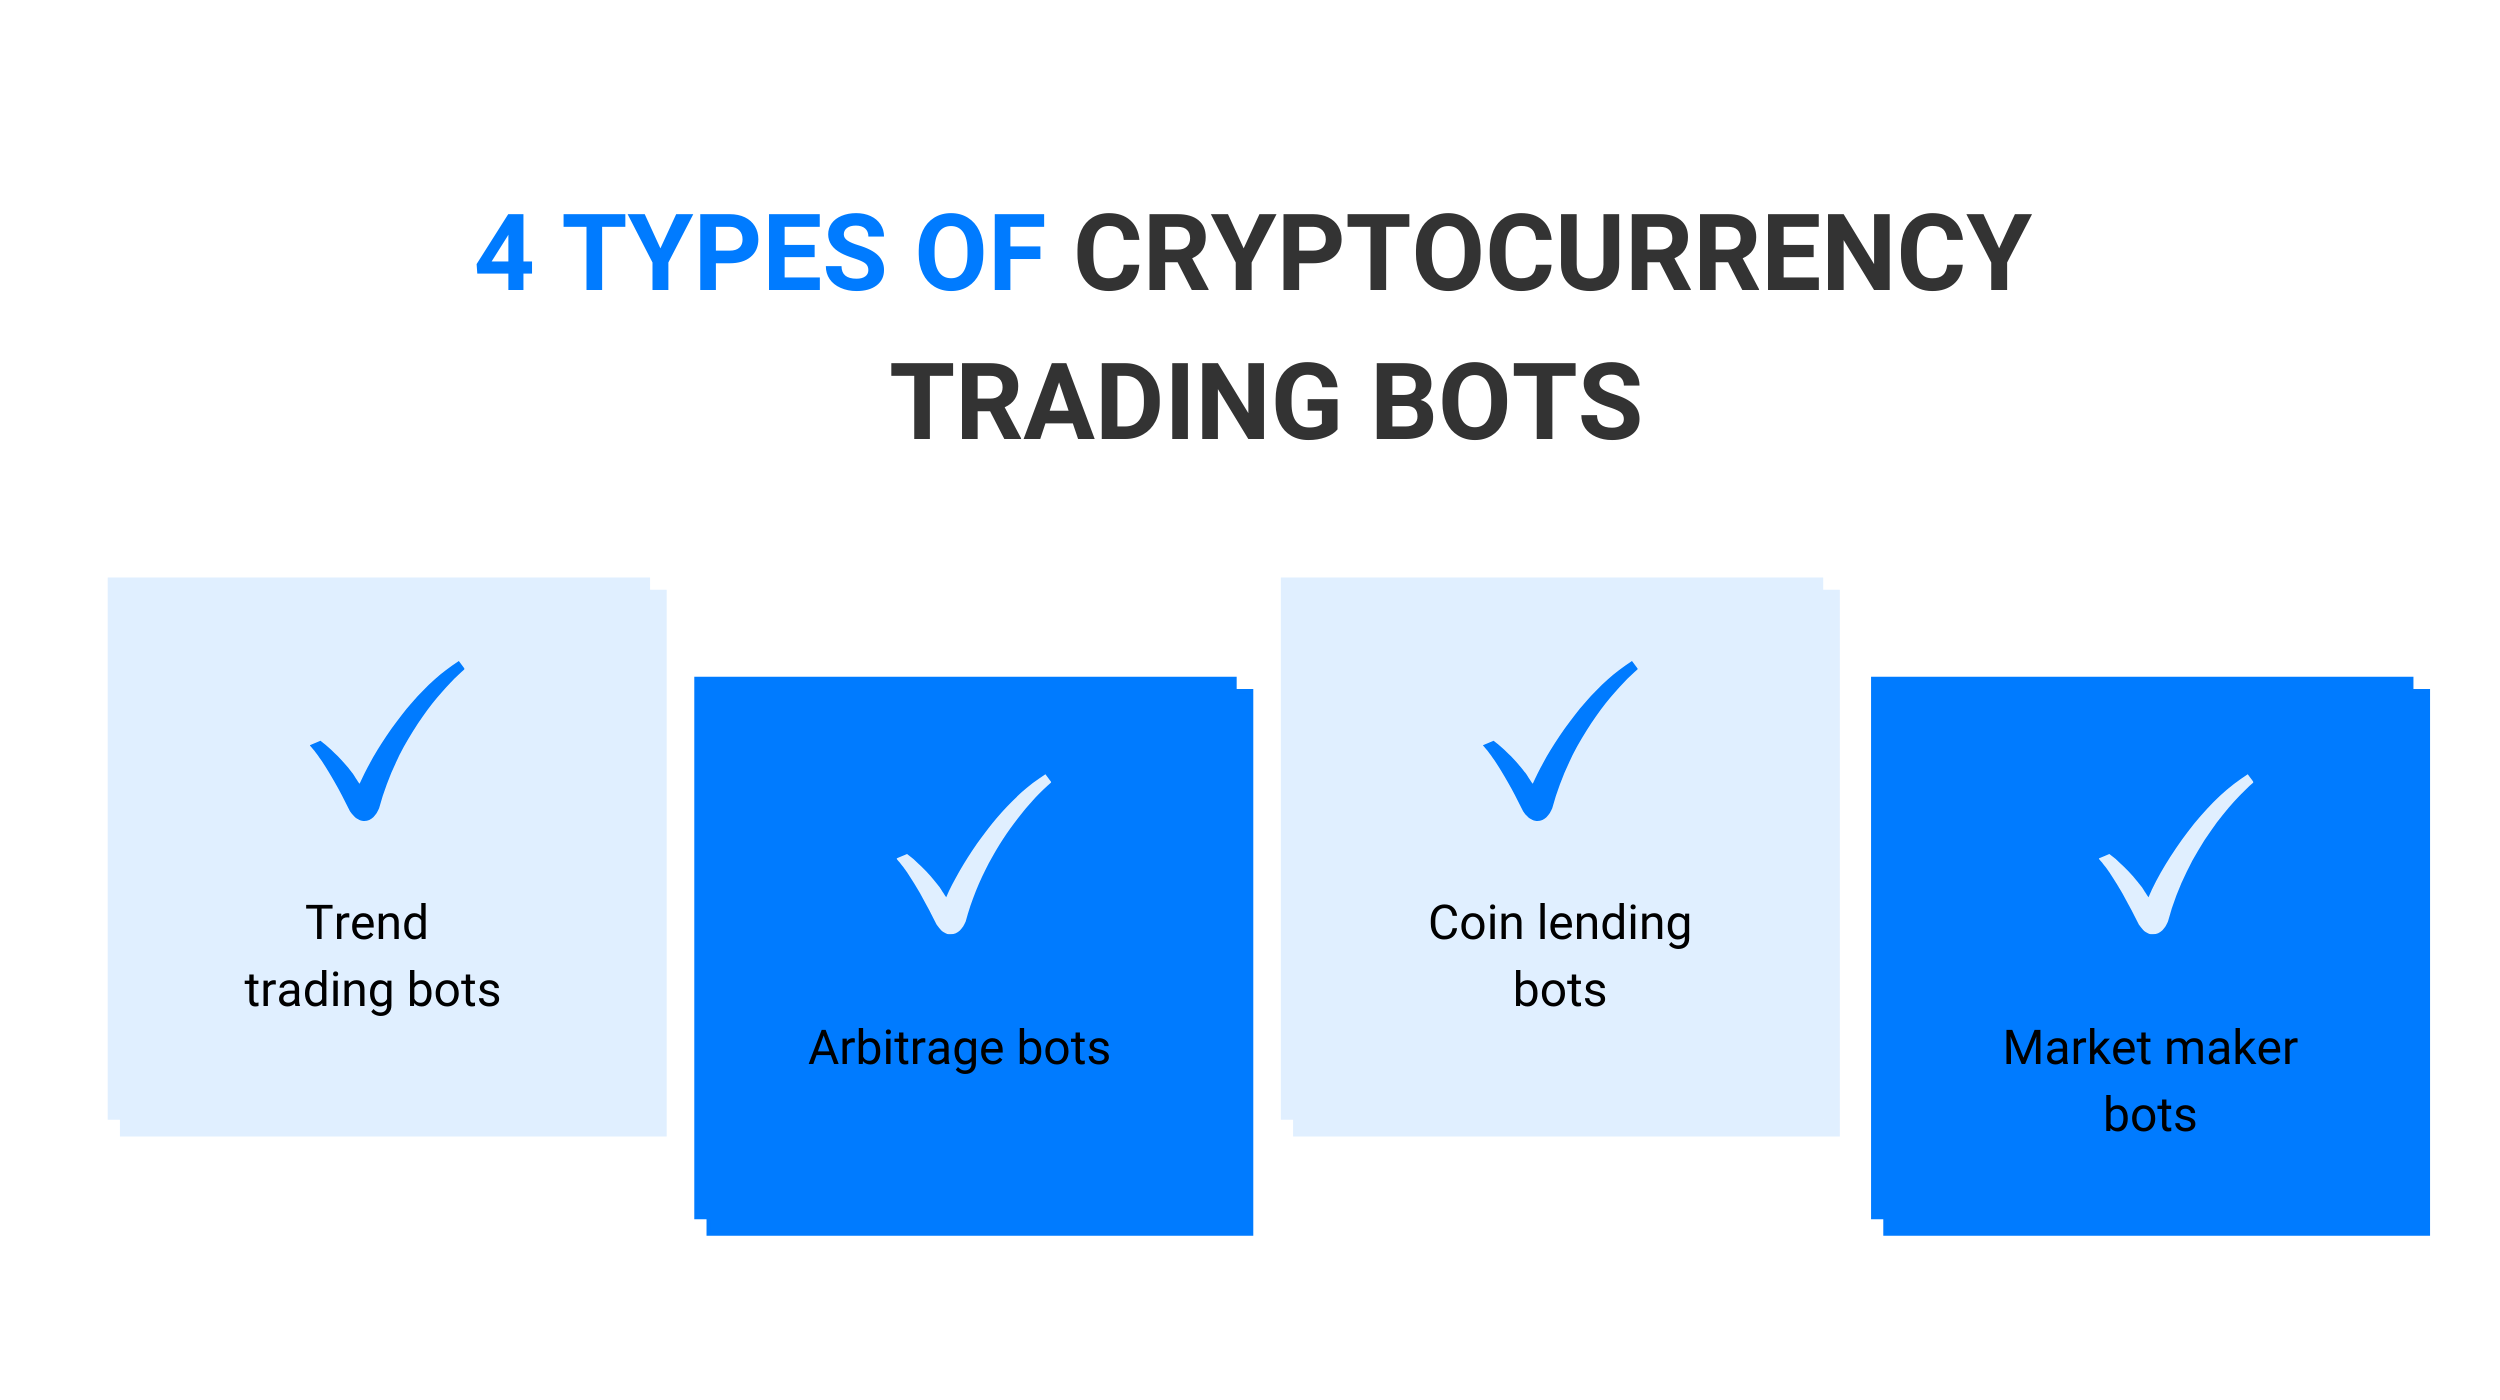 4 Types of Cryptocurrency Trading Bots